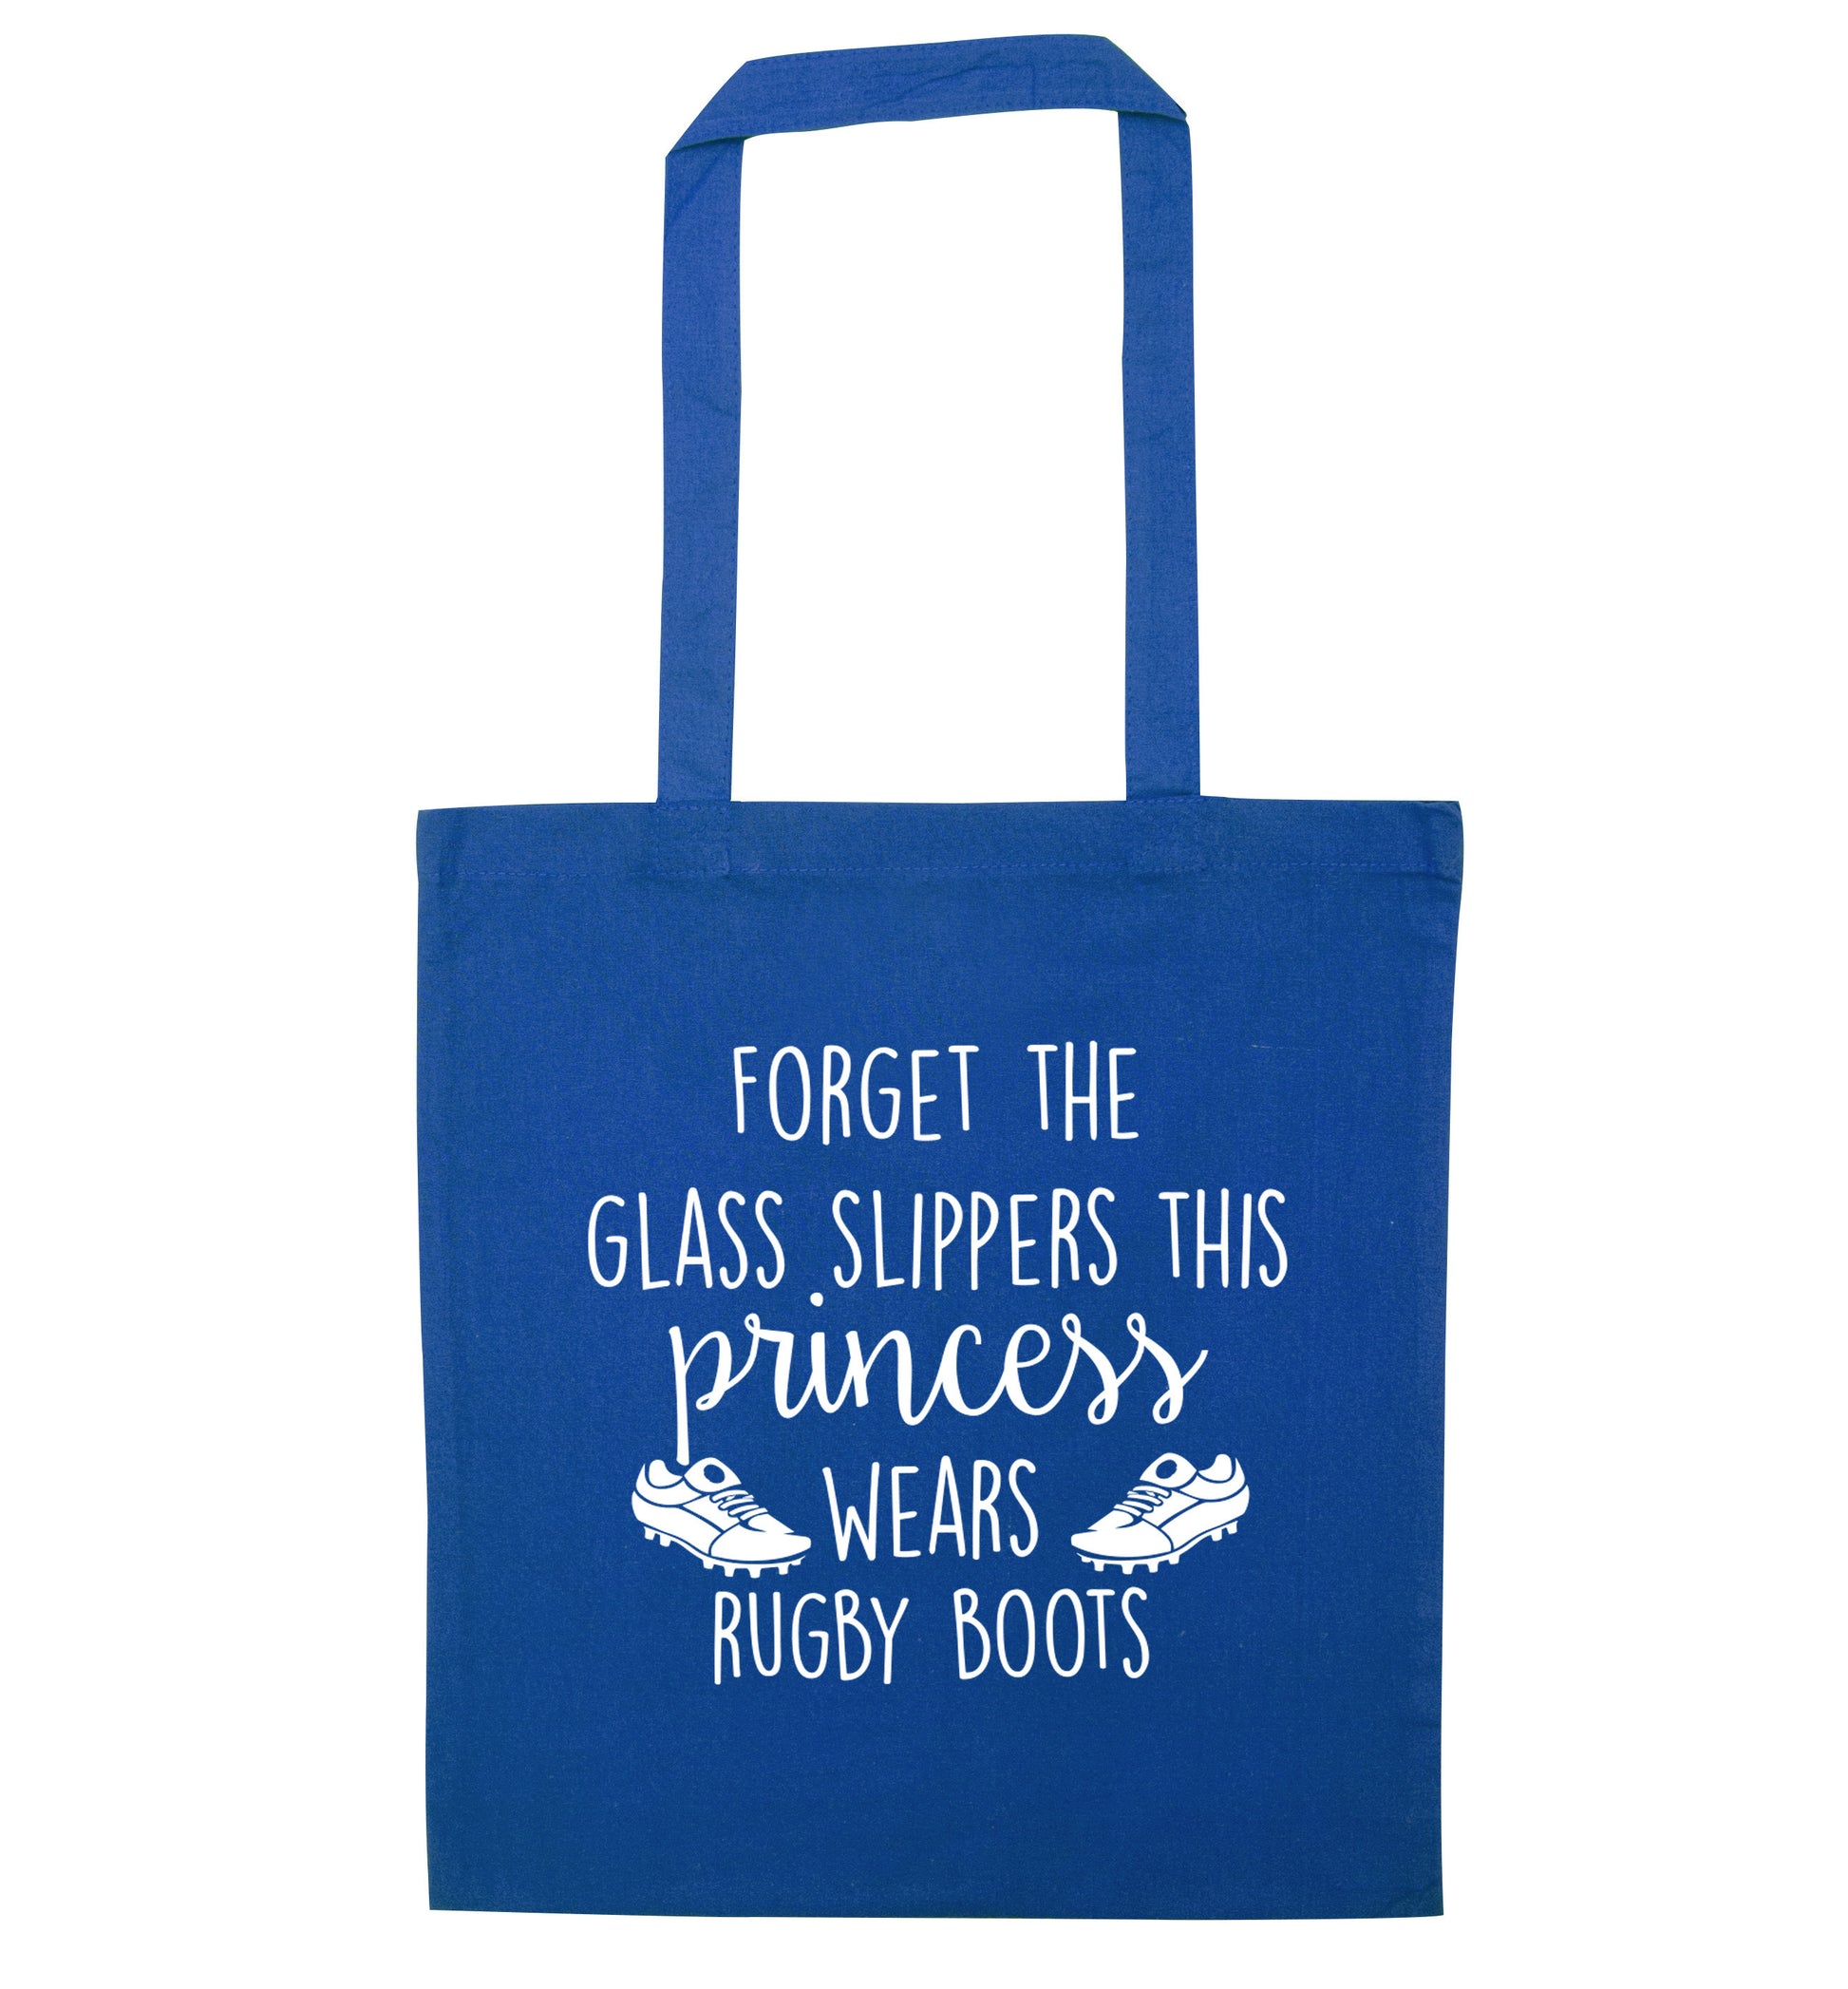 Forget the glass slippers this princess wears rugby boots blue tote bag